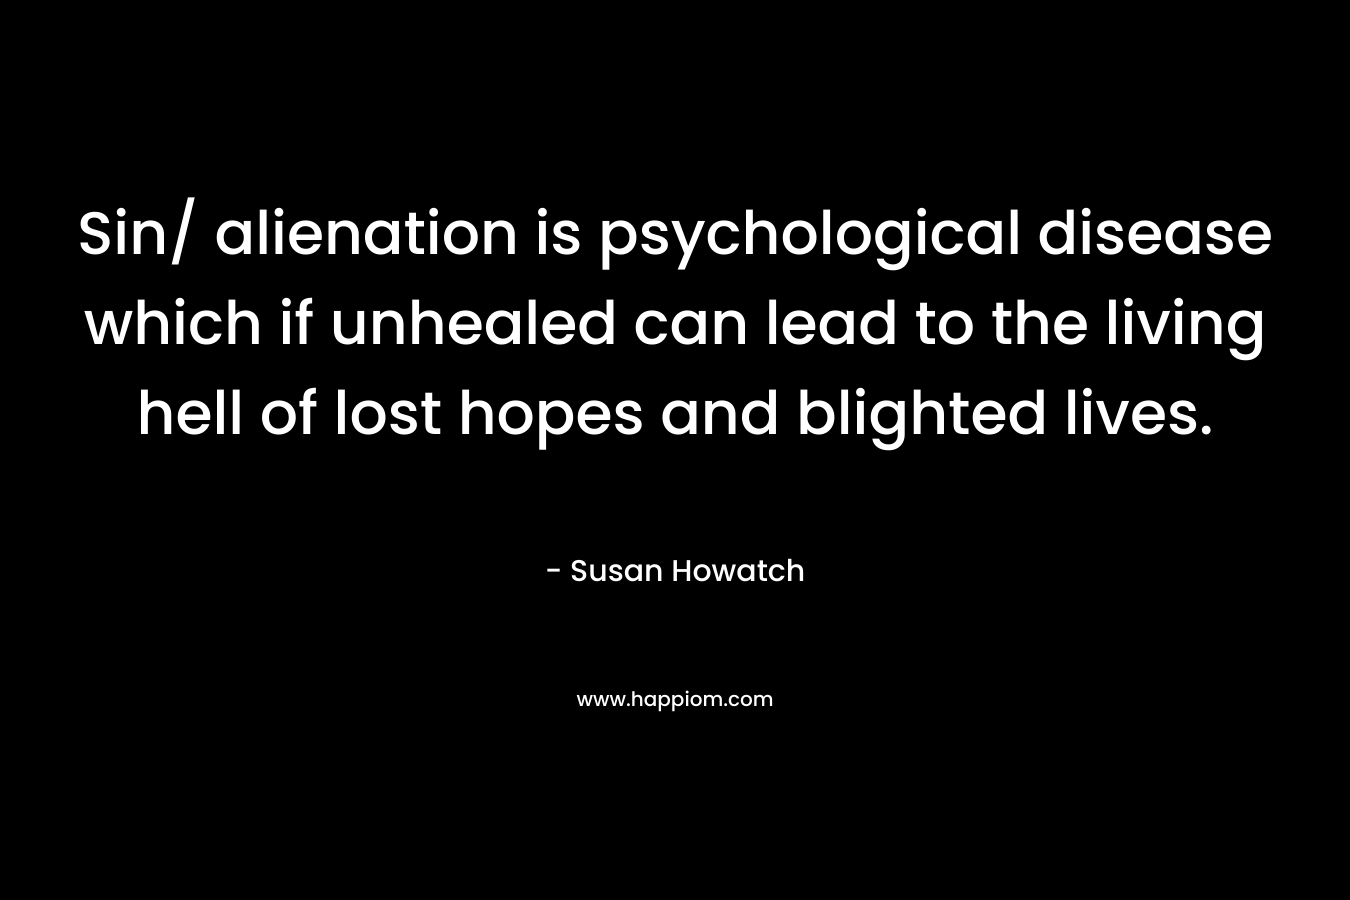 Sin/ alienation is psychological disease which if unhealed can lead to the living hell of lost hopes and blighted lives.